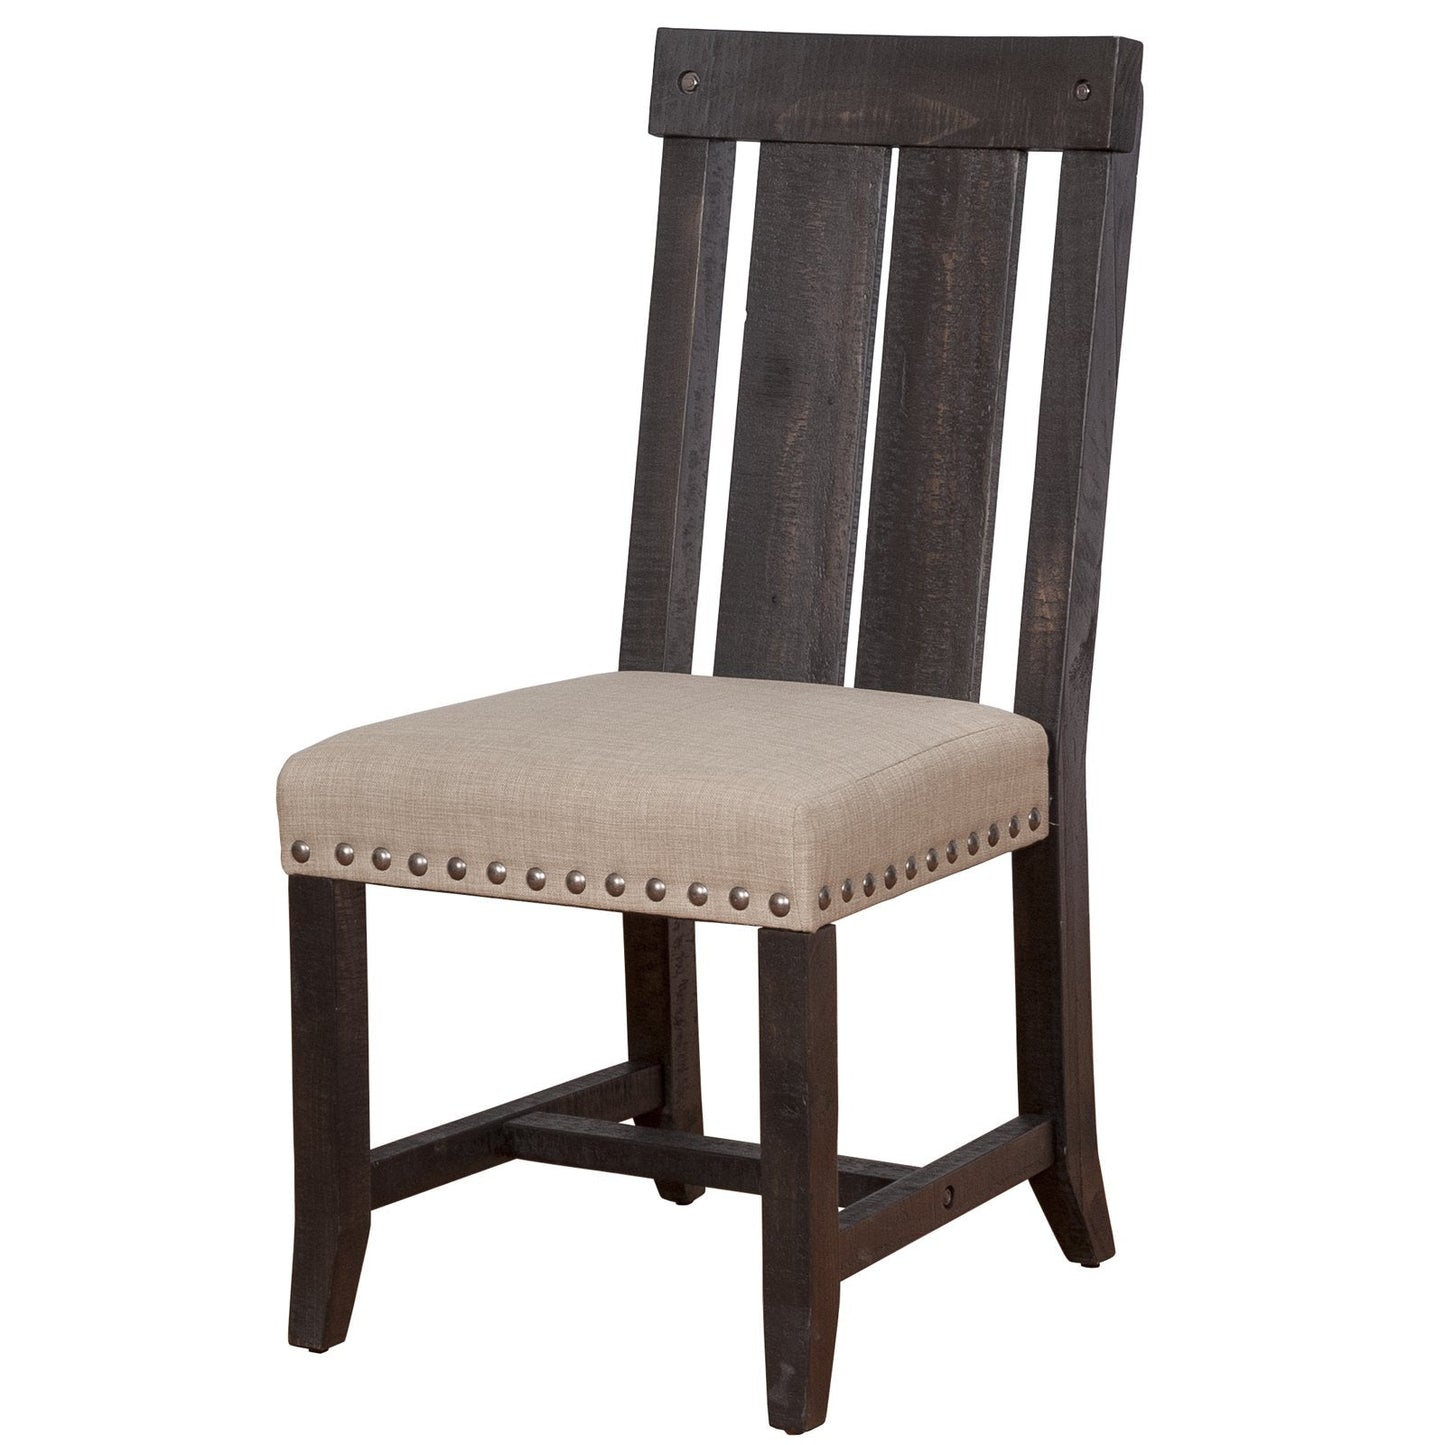 Modus Yosemite Wood 2 Chair in Cafe